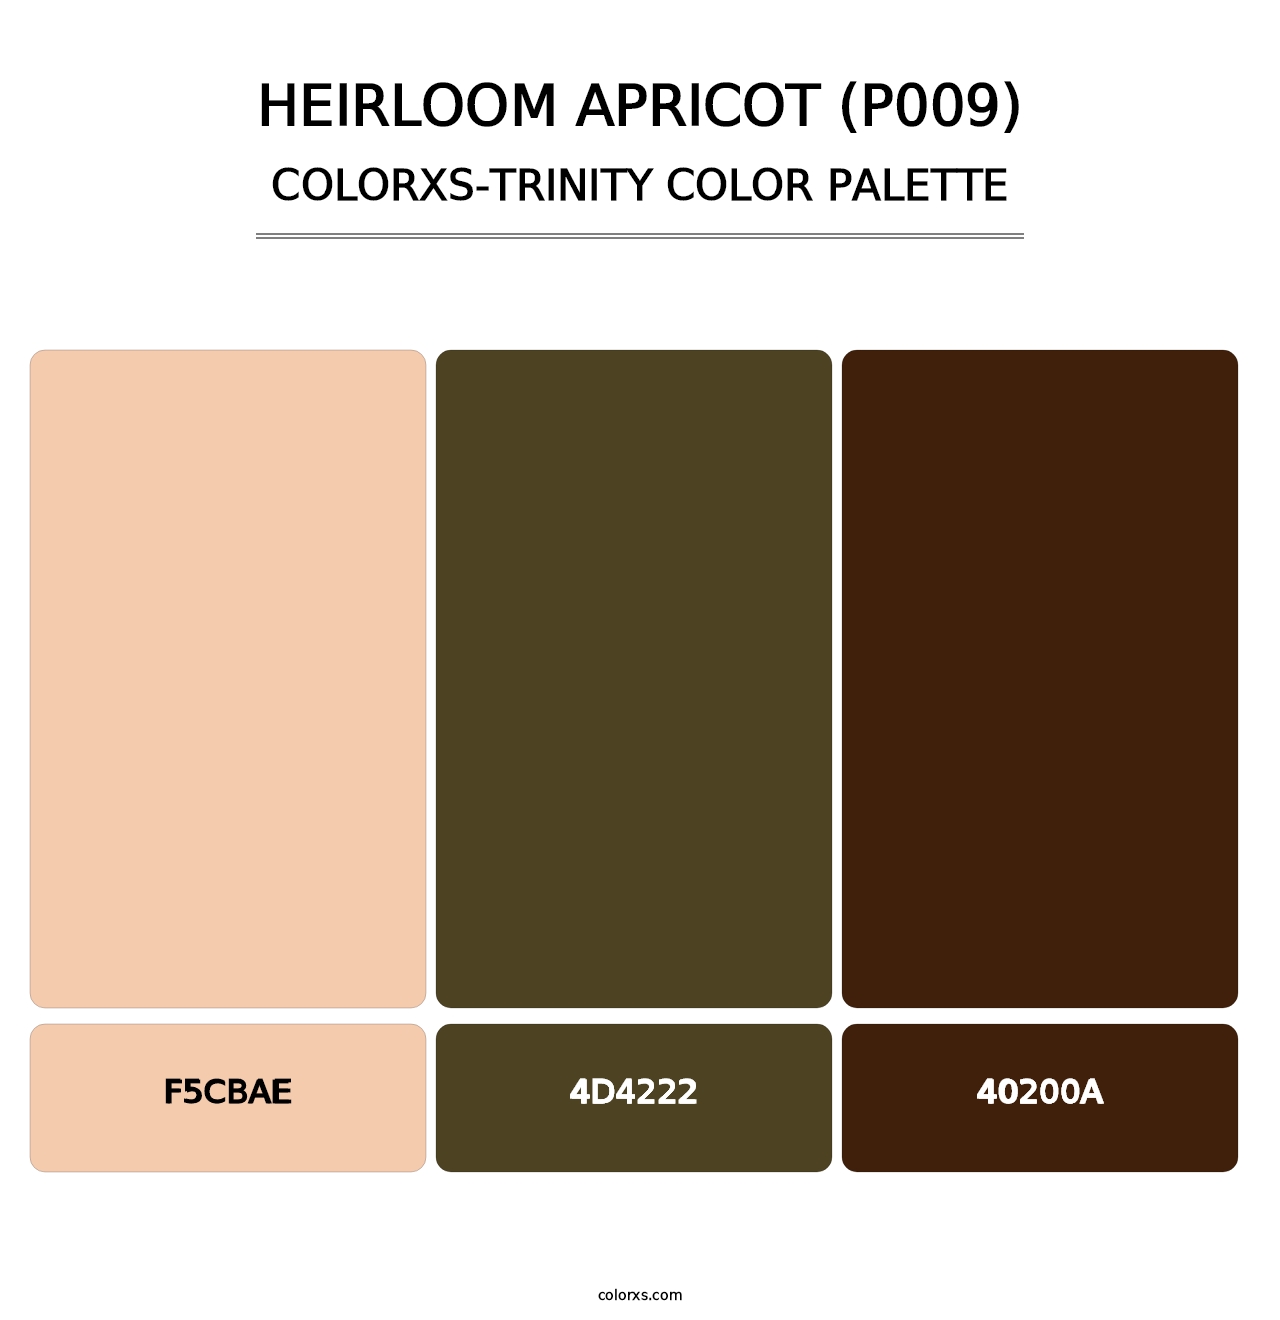 Heirloom Apricot (P009) - Colorxs Trinity Palette